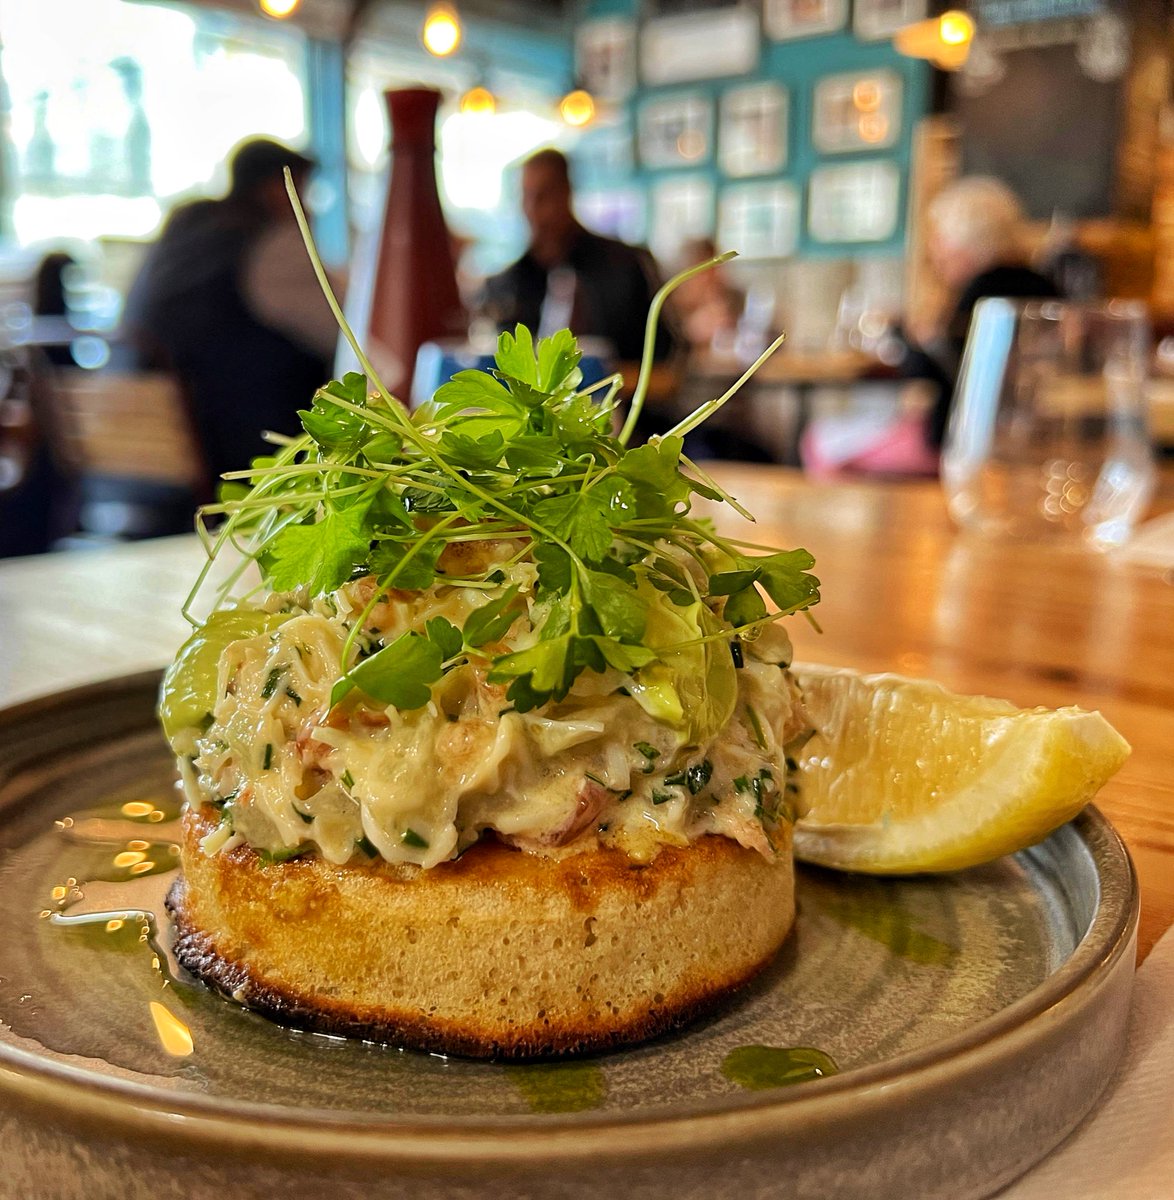 Dorset crab crumpet? We’ve piled crab salad on a toasted crumpet and finished with a fresh herb mayo 🦀 #crab #crumpet #thescallopshell